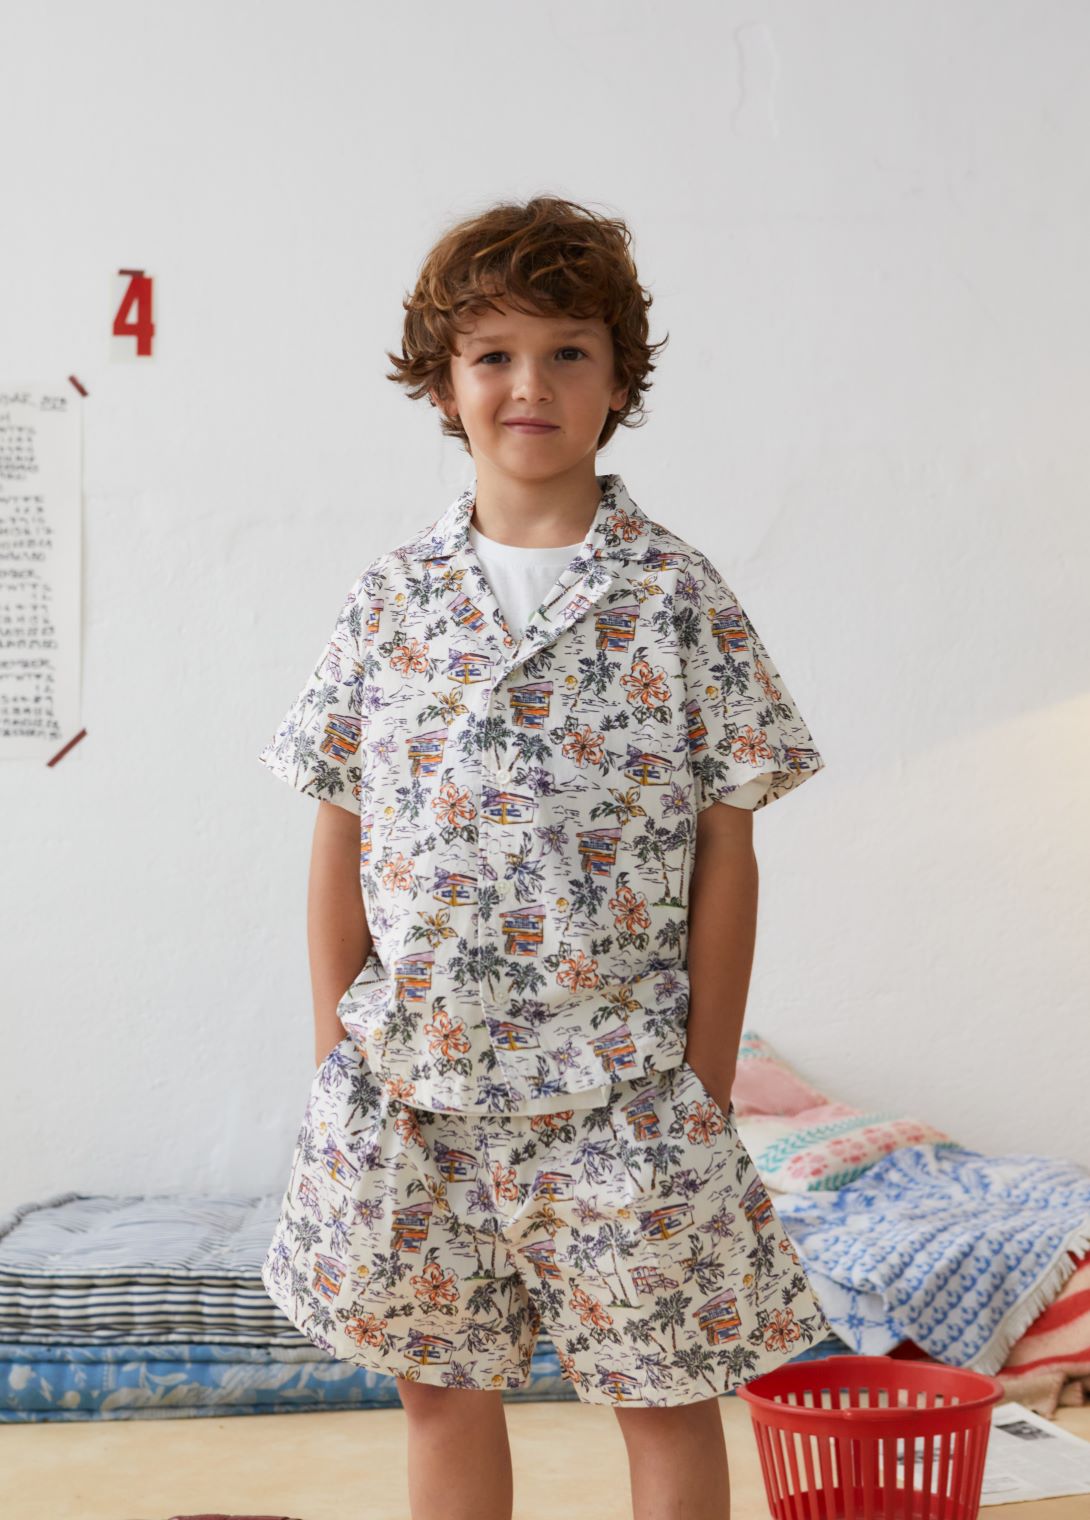 【the new society】【30%OFF】Belmont Bermuda Belmont Print ショートパンツ 3y,4y,6y  | Coucoubebe/ククベベ